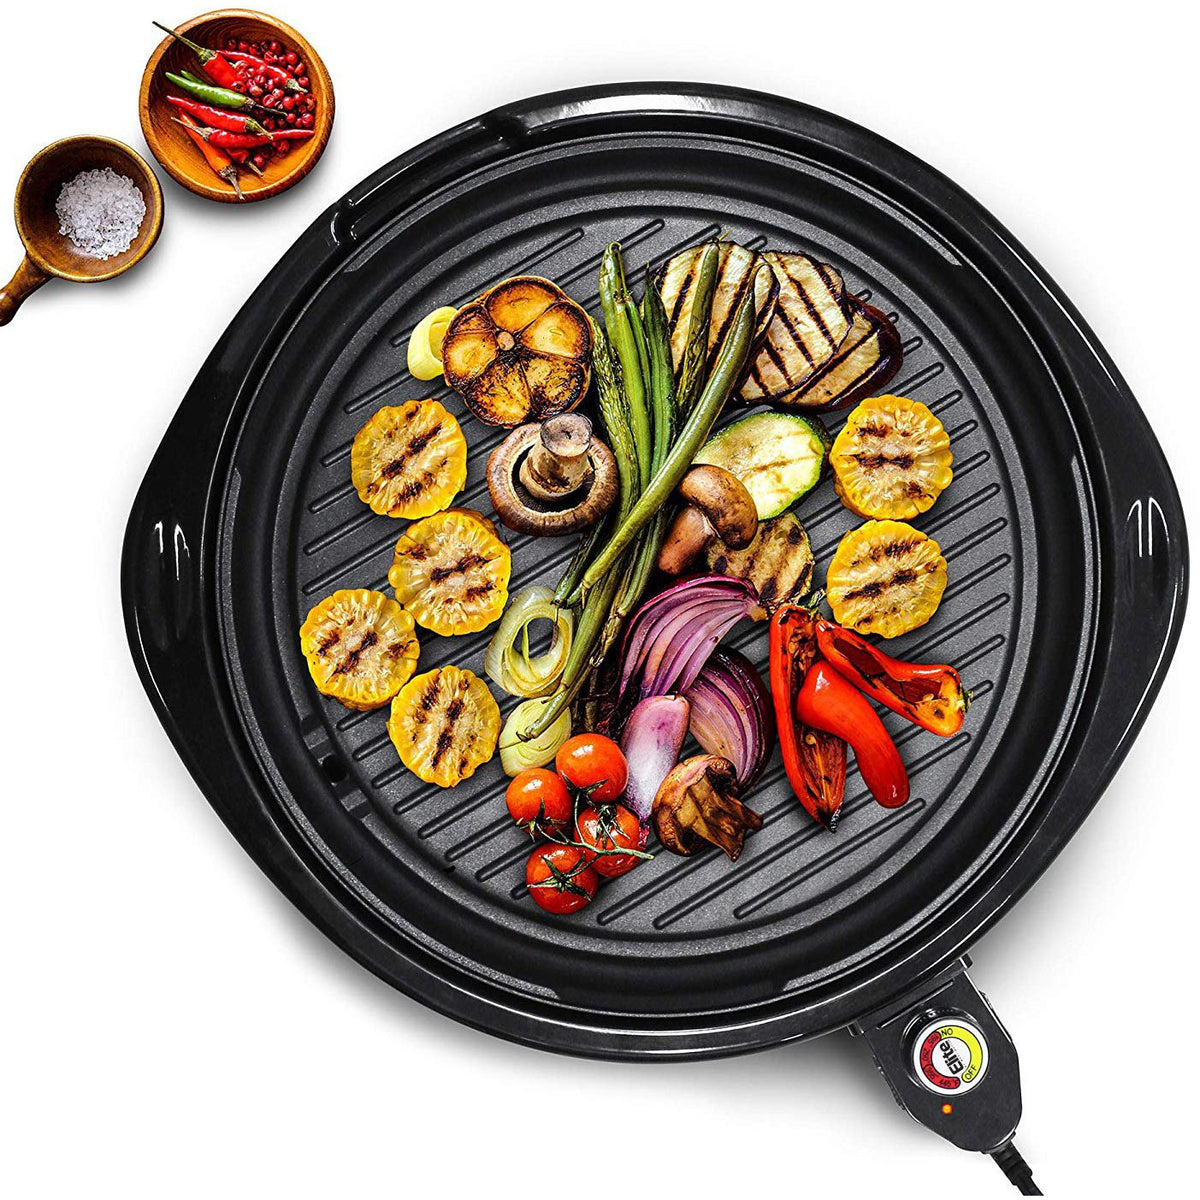 Elite Gourmet EGL-3450 Smokeless Indoor Electric BBQ Grill Dishwasher Safe,  Nonstick, Adjustable Temperature, Fast Heat Up, Low-Fat Meals Easy to